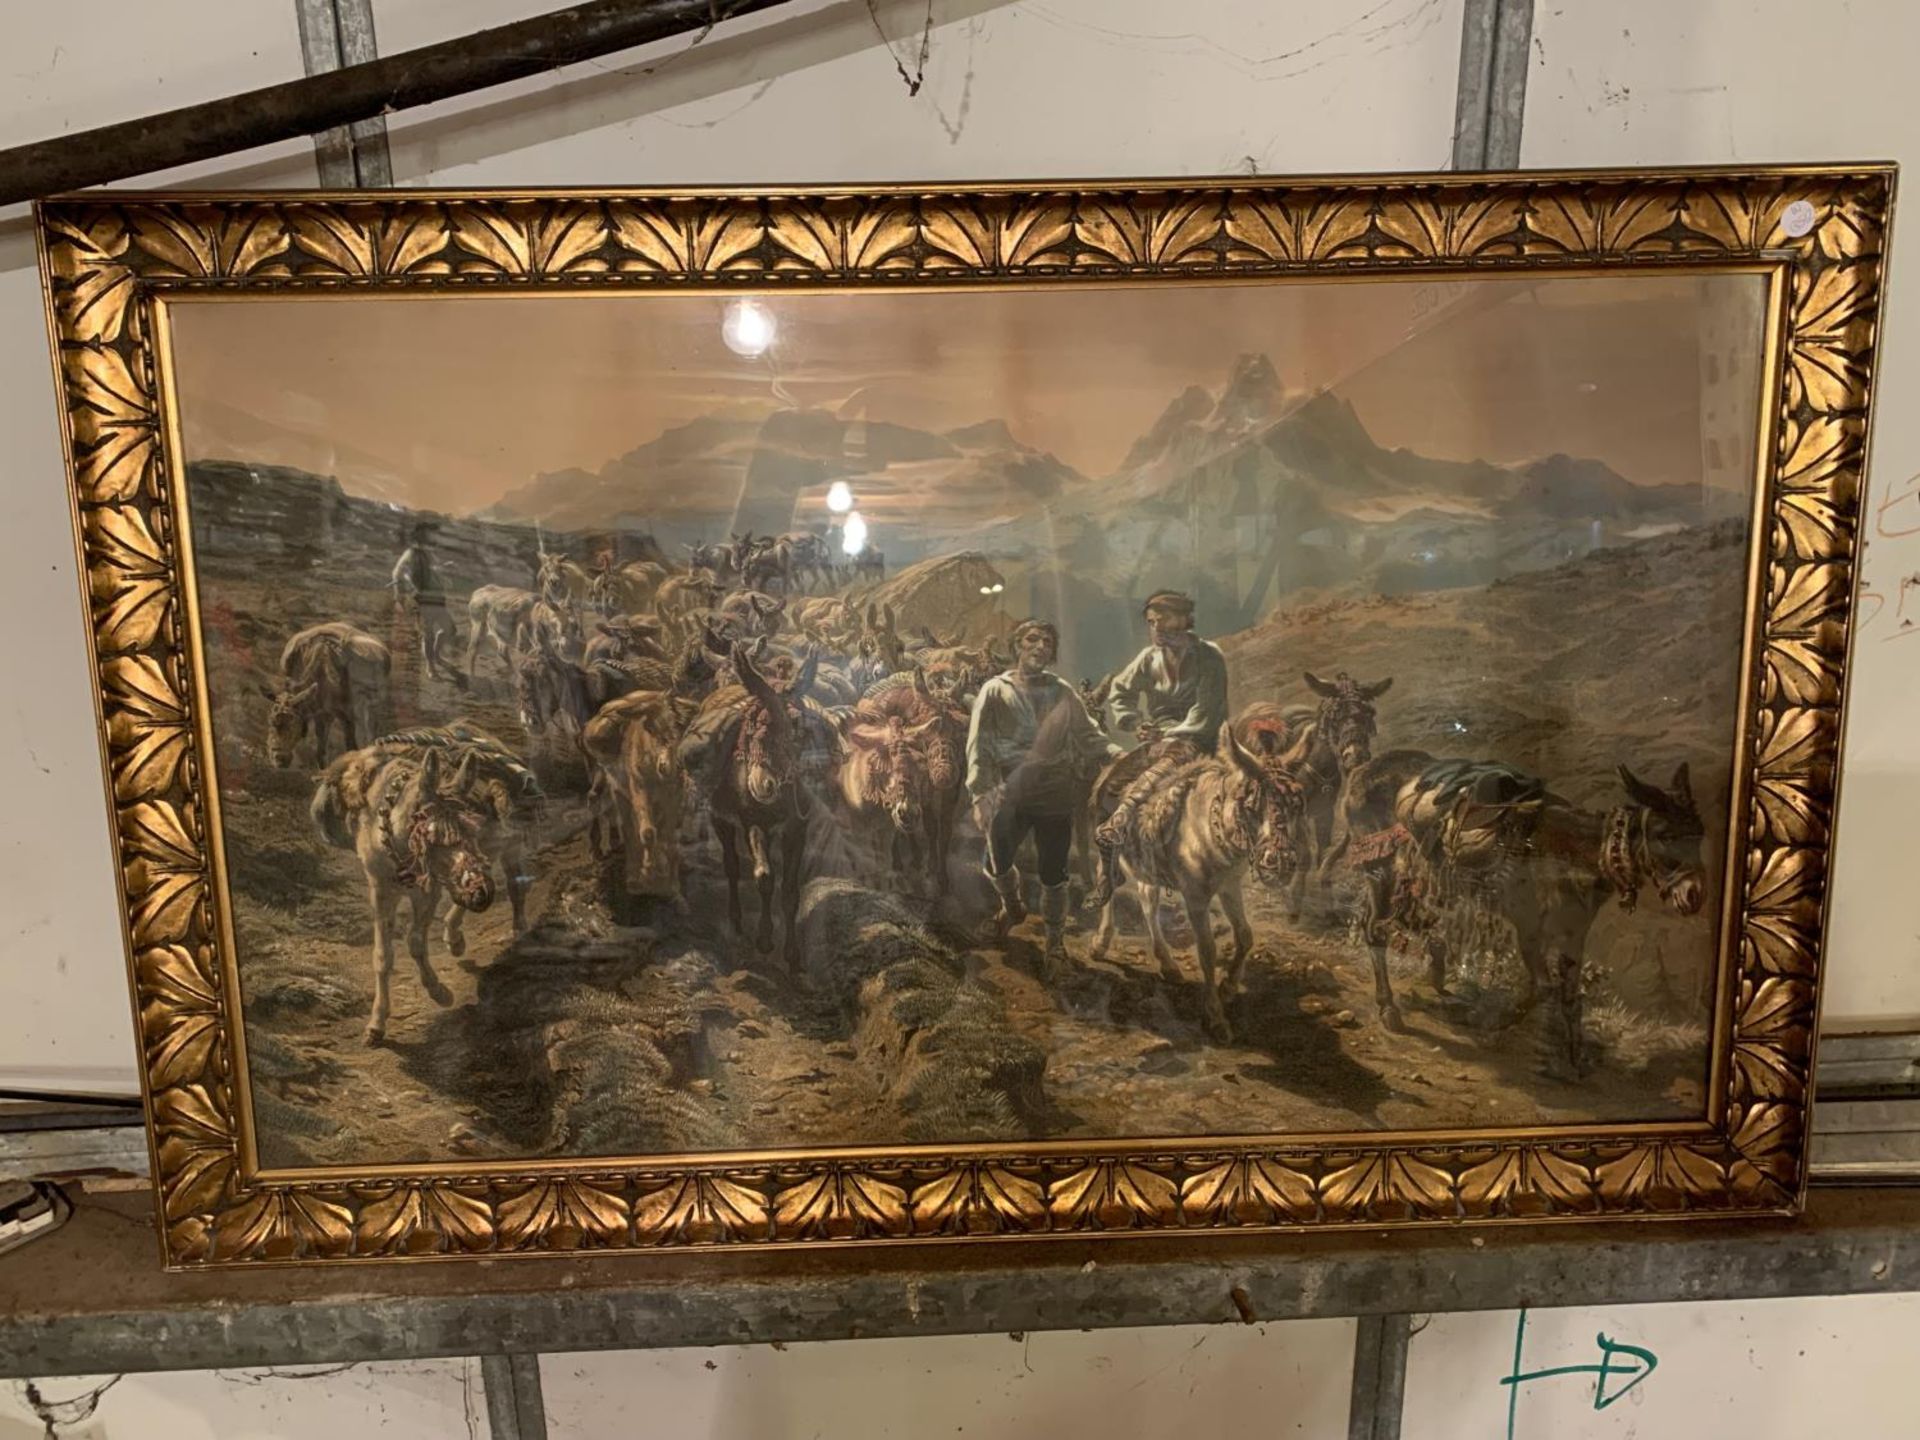 A LARGE GILT FRAMED PICTURE OF DONKEYS BEING HERDED